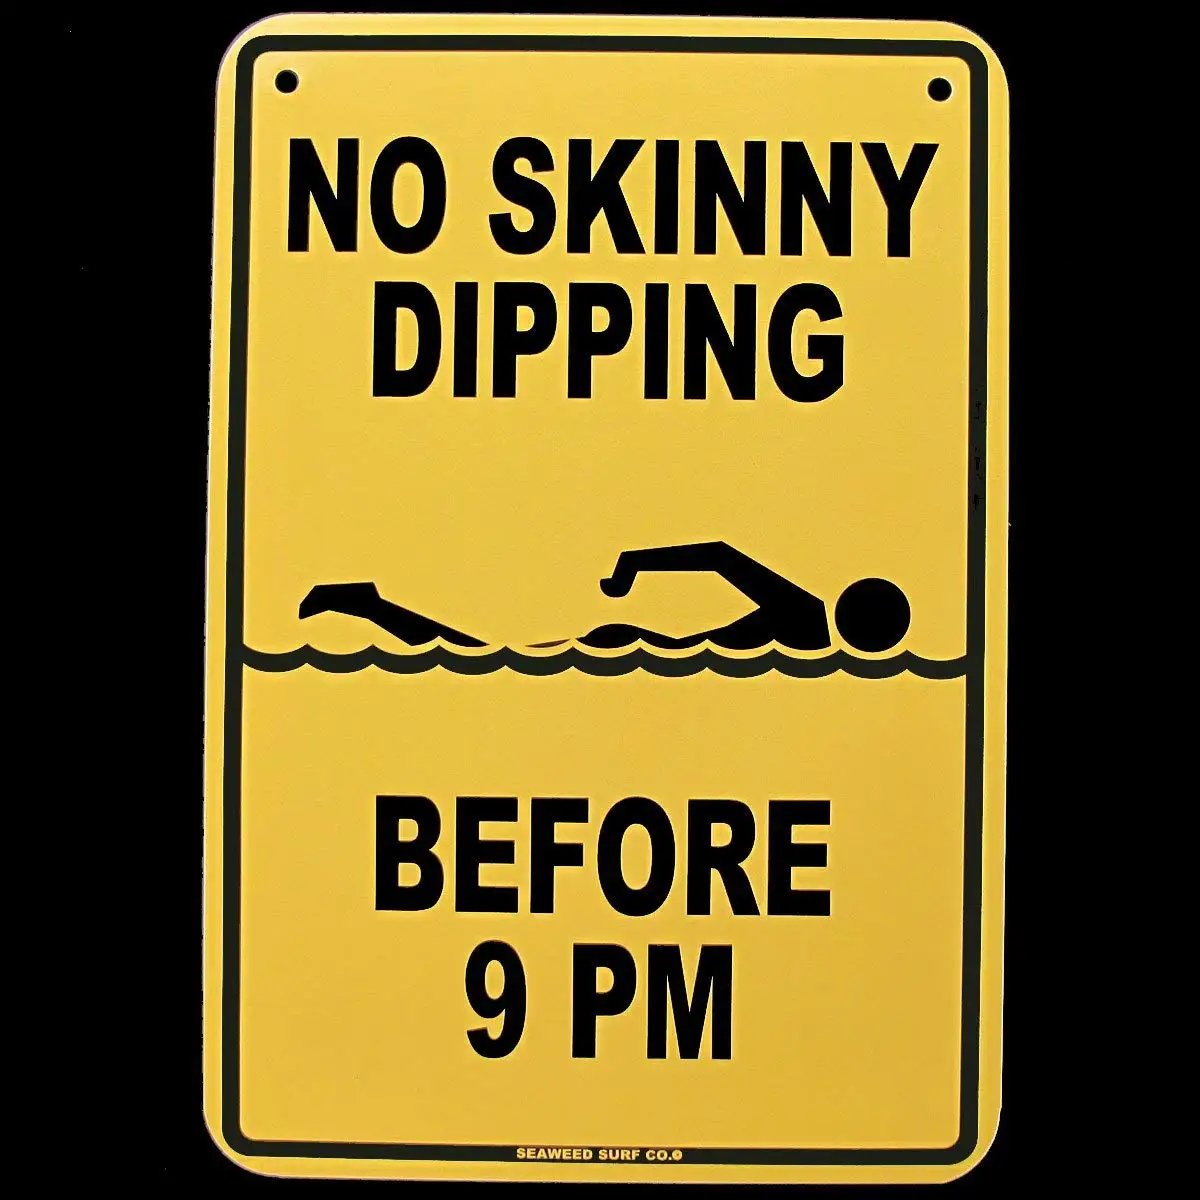 Buy Skinny Dipping Is Highly Encouraged In This Hot Tub 8x12 Funny